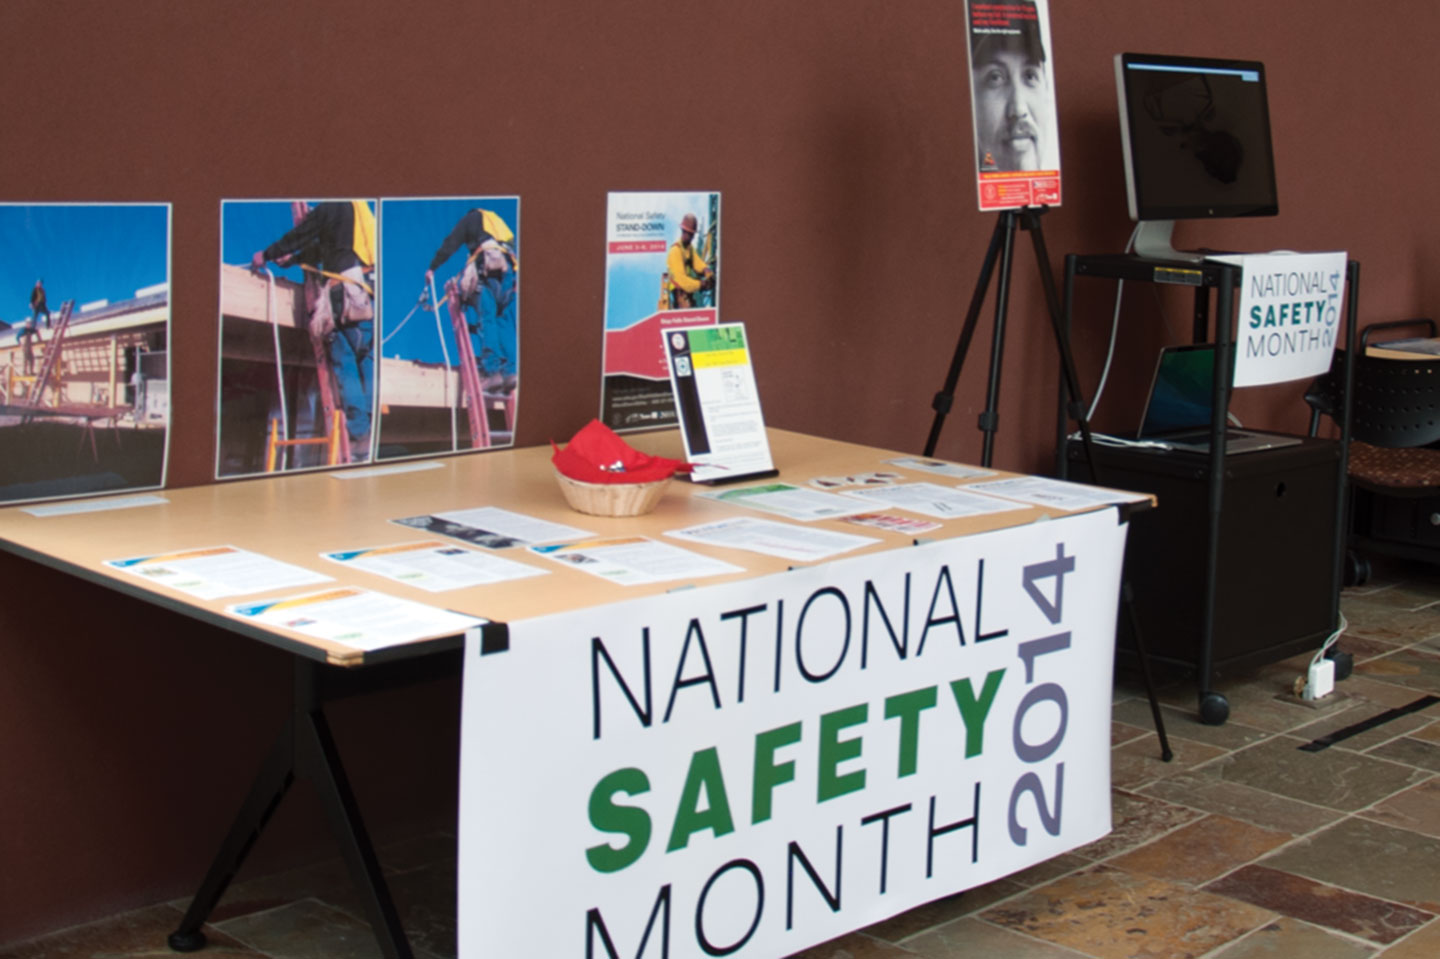 National Safety Month display